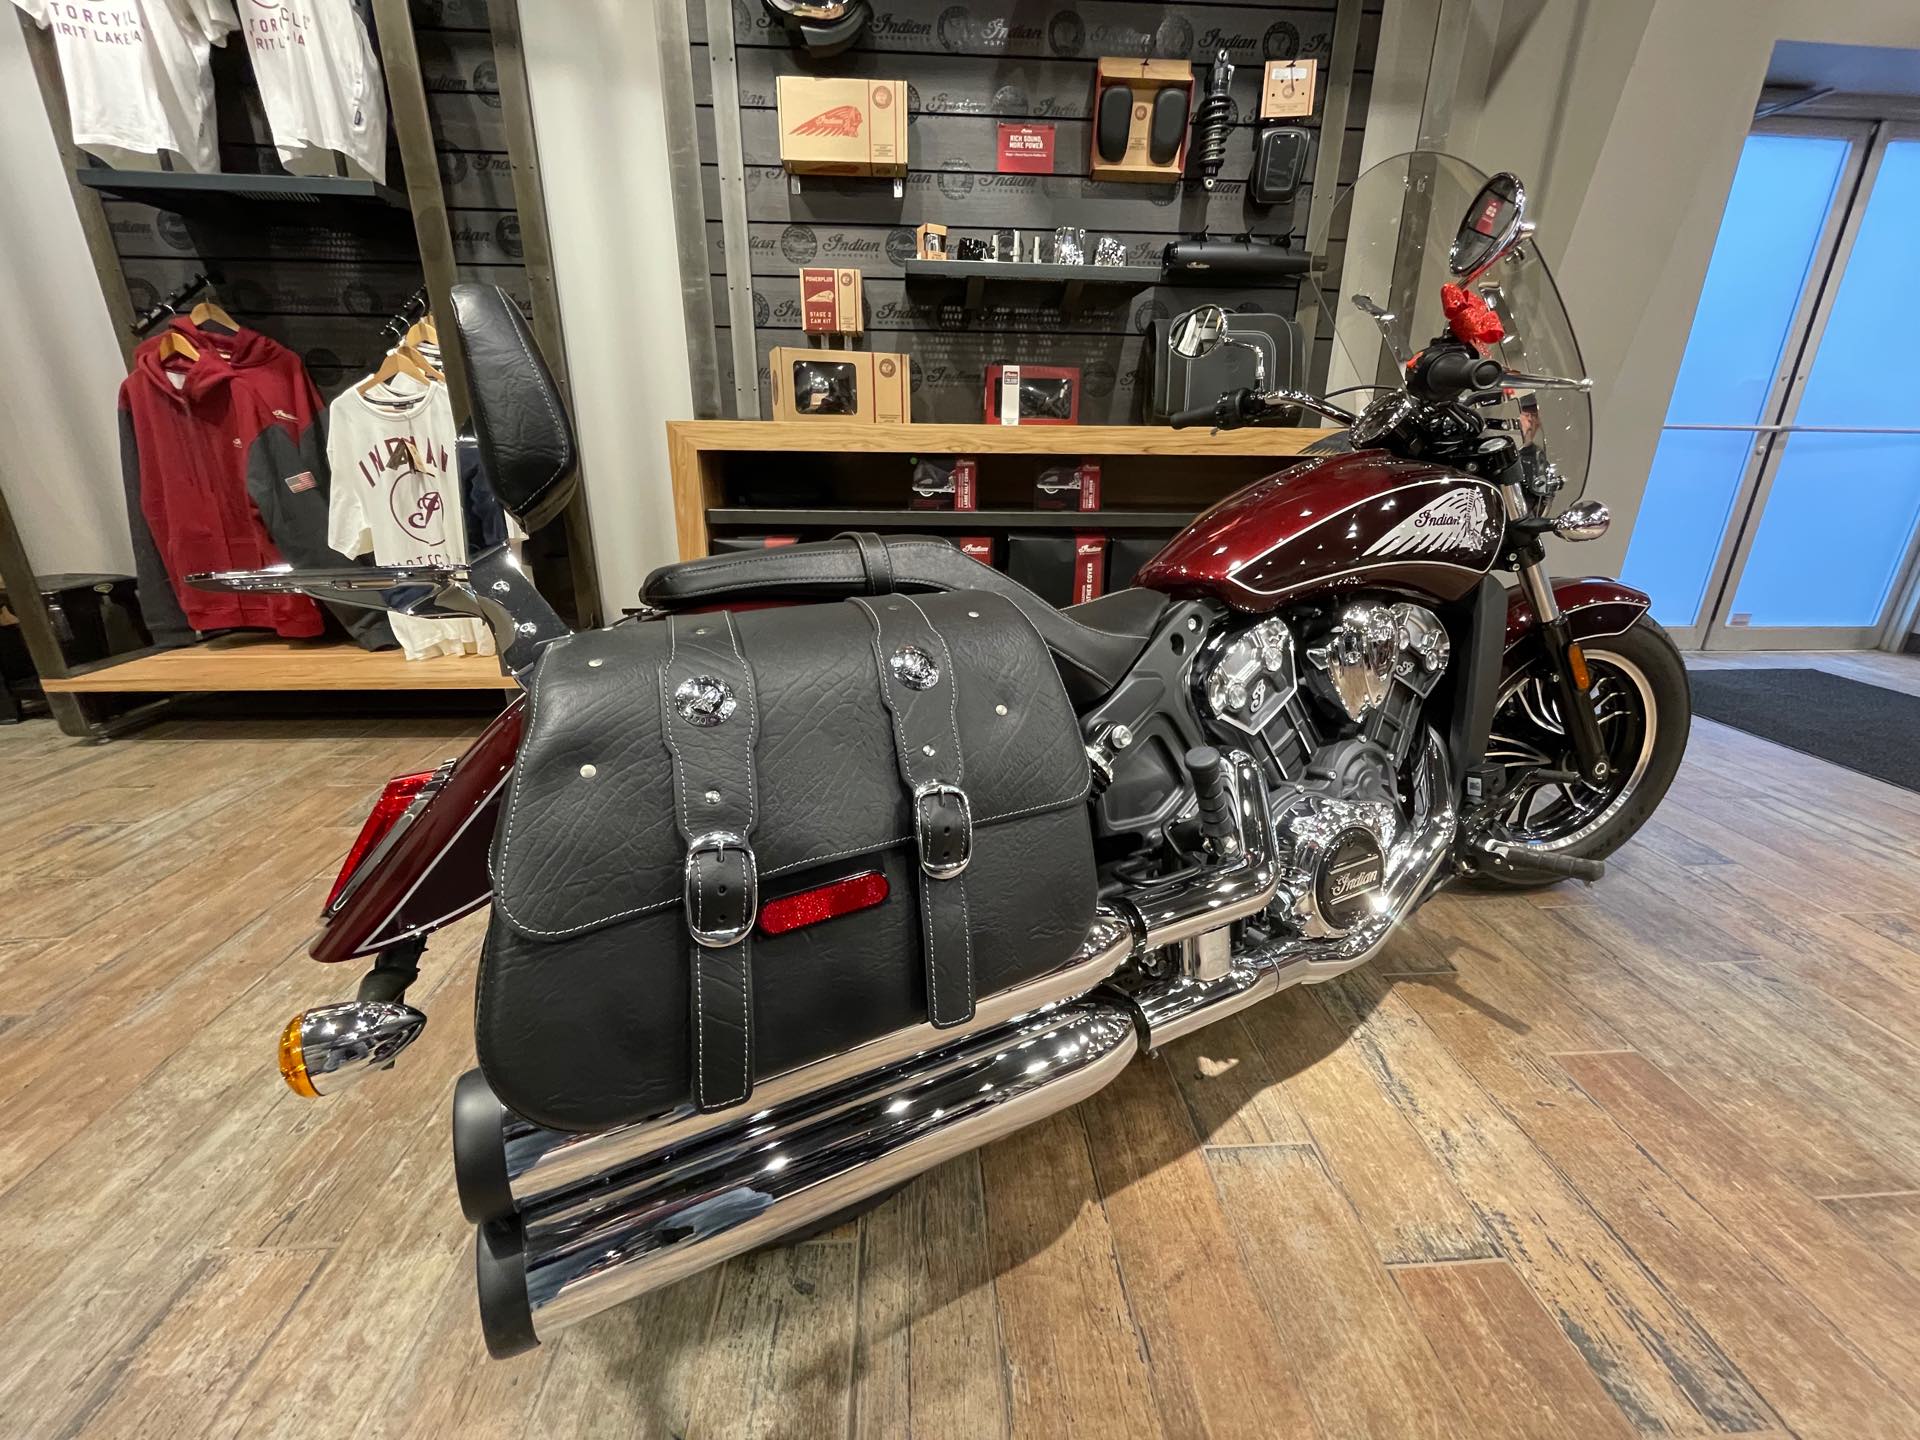 2021 Indian Scout Scout - ABS at Pitt Cycles